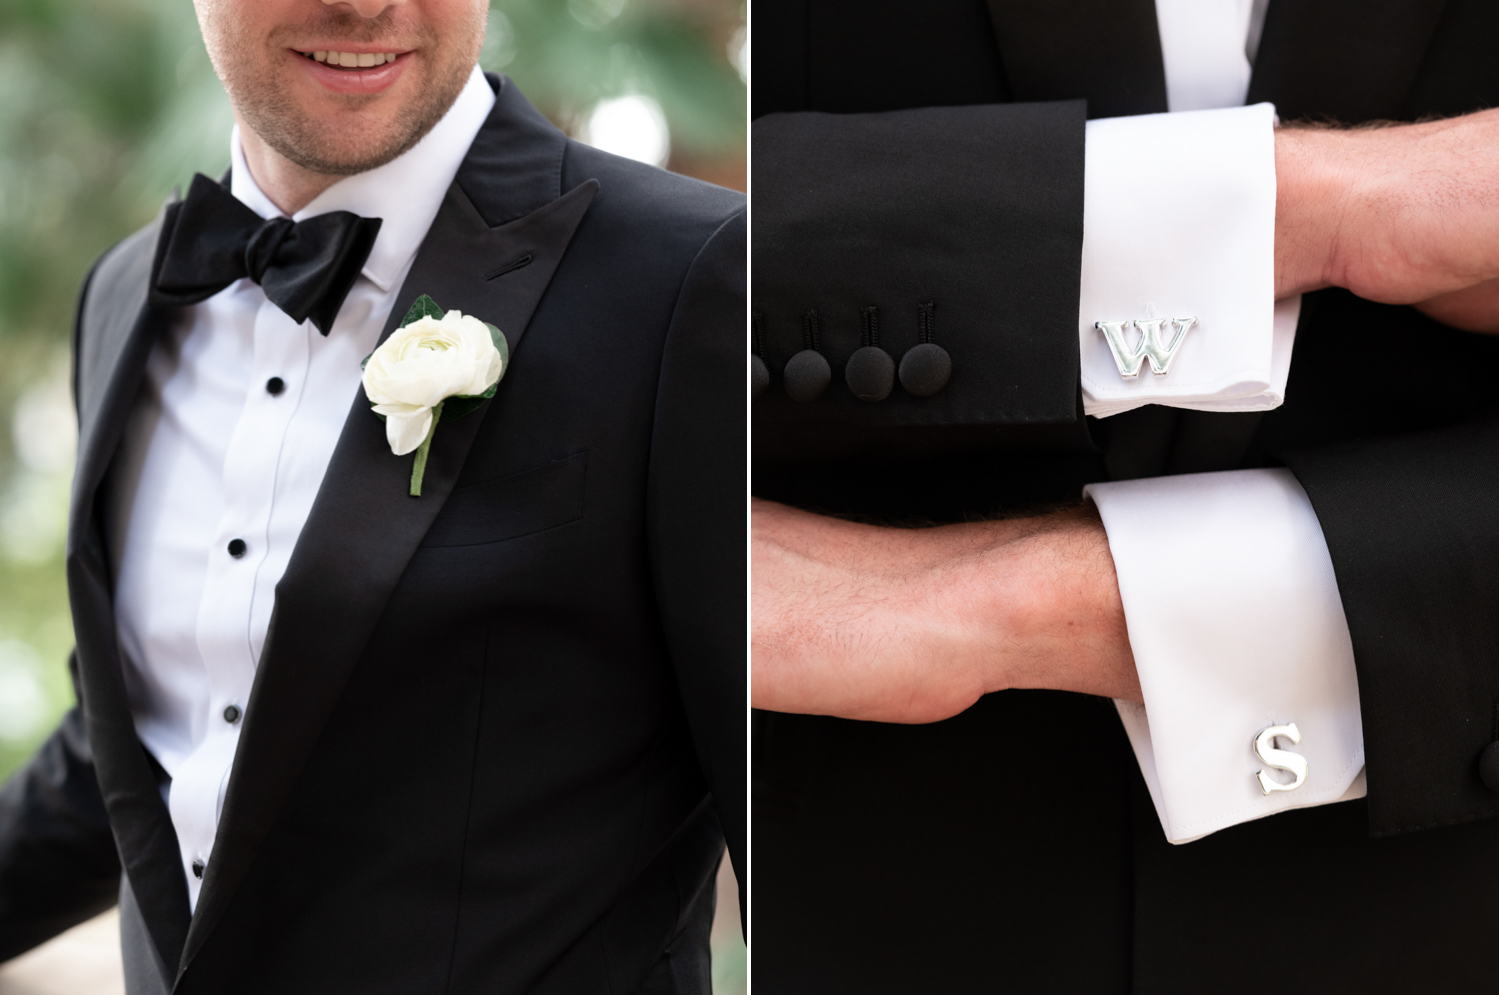 Detail shots of the groom's suit, boutonniere, and custom monogrammed "WS" cufflinks